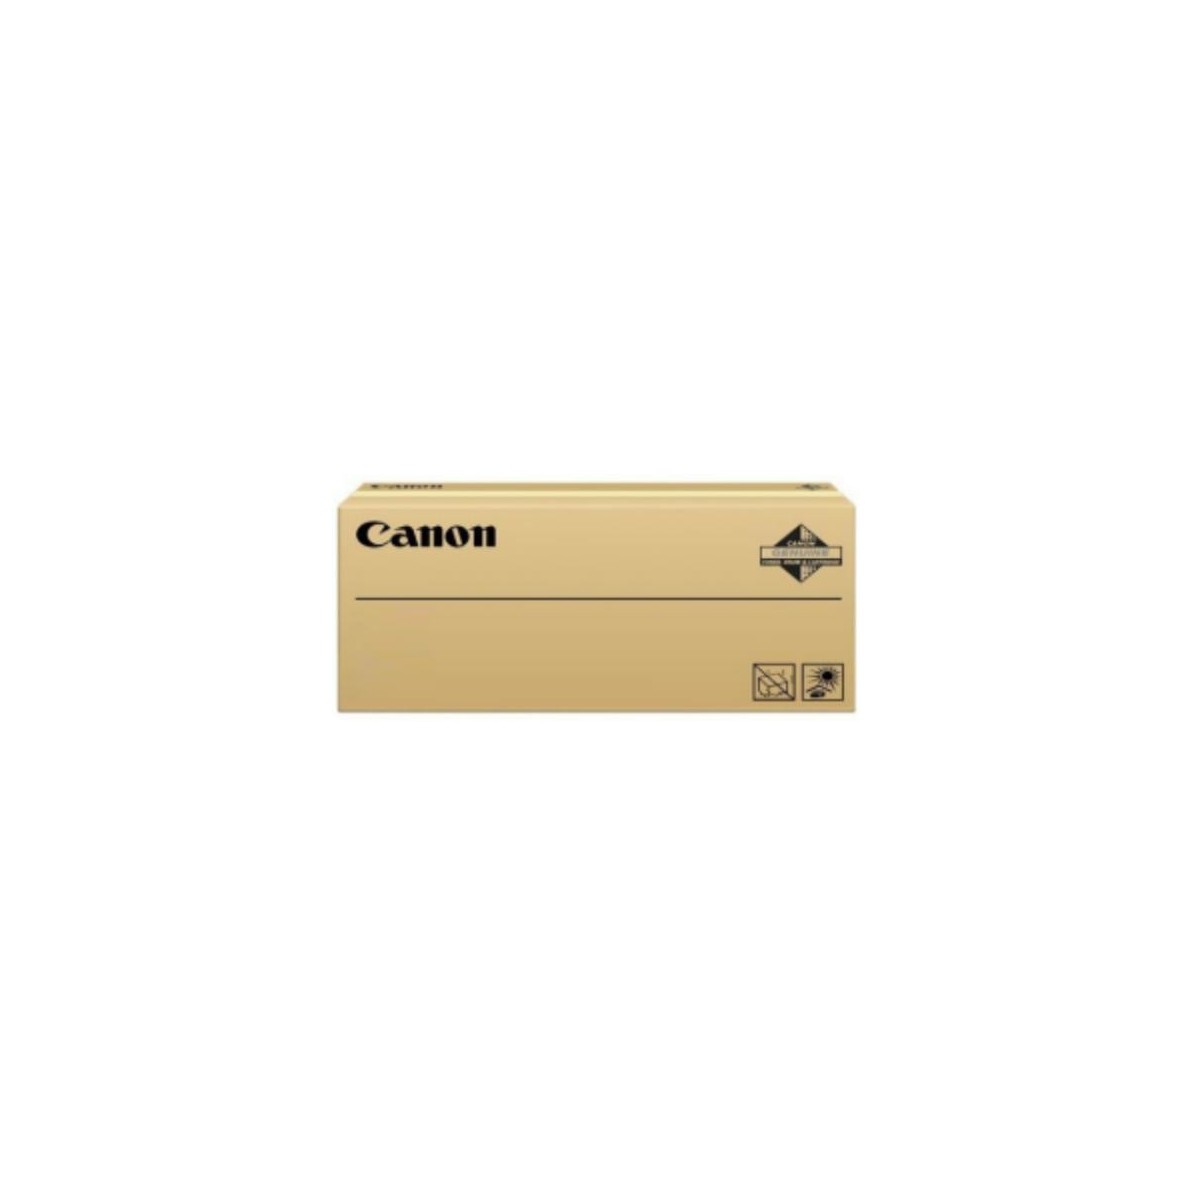 Canon T07 - 27000 pages - Yellow - 1 pc(s)